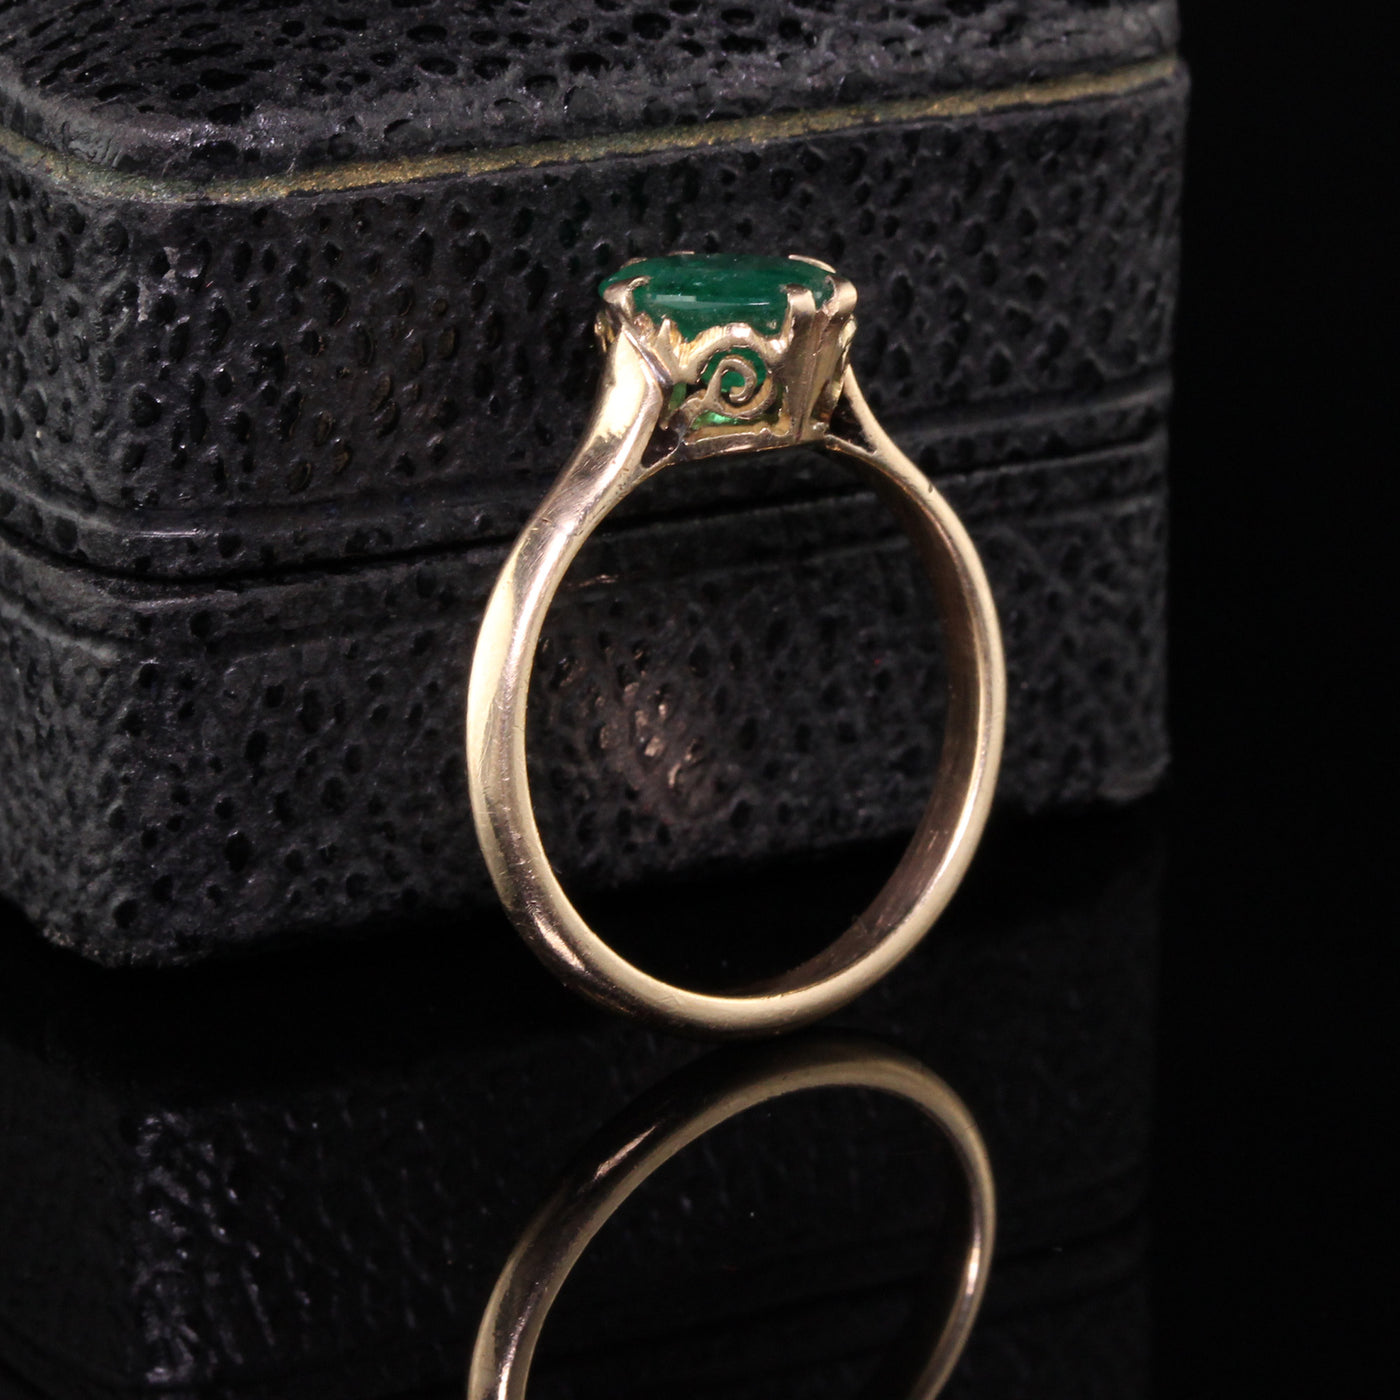 Antique Victorian 14K Yellow Gold Emerald Engagement Ring